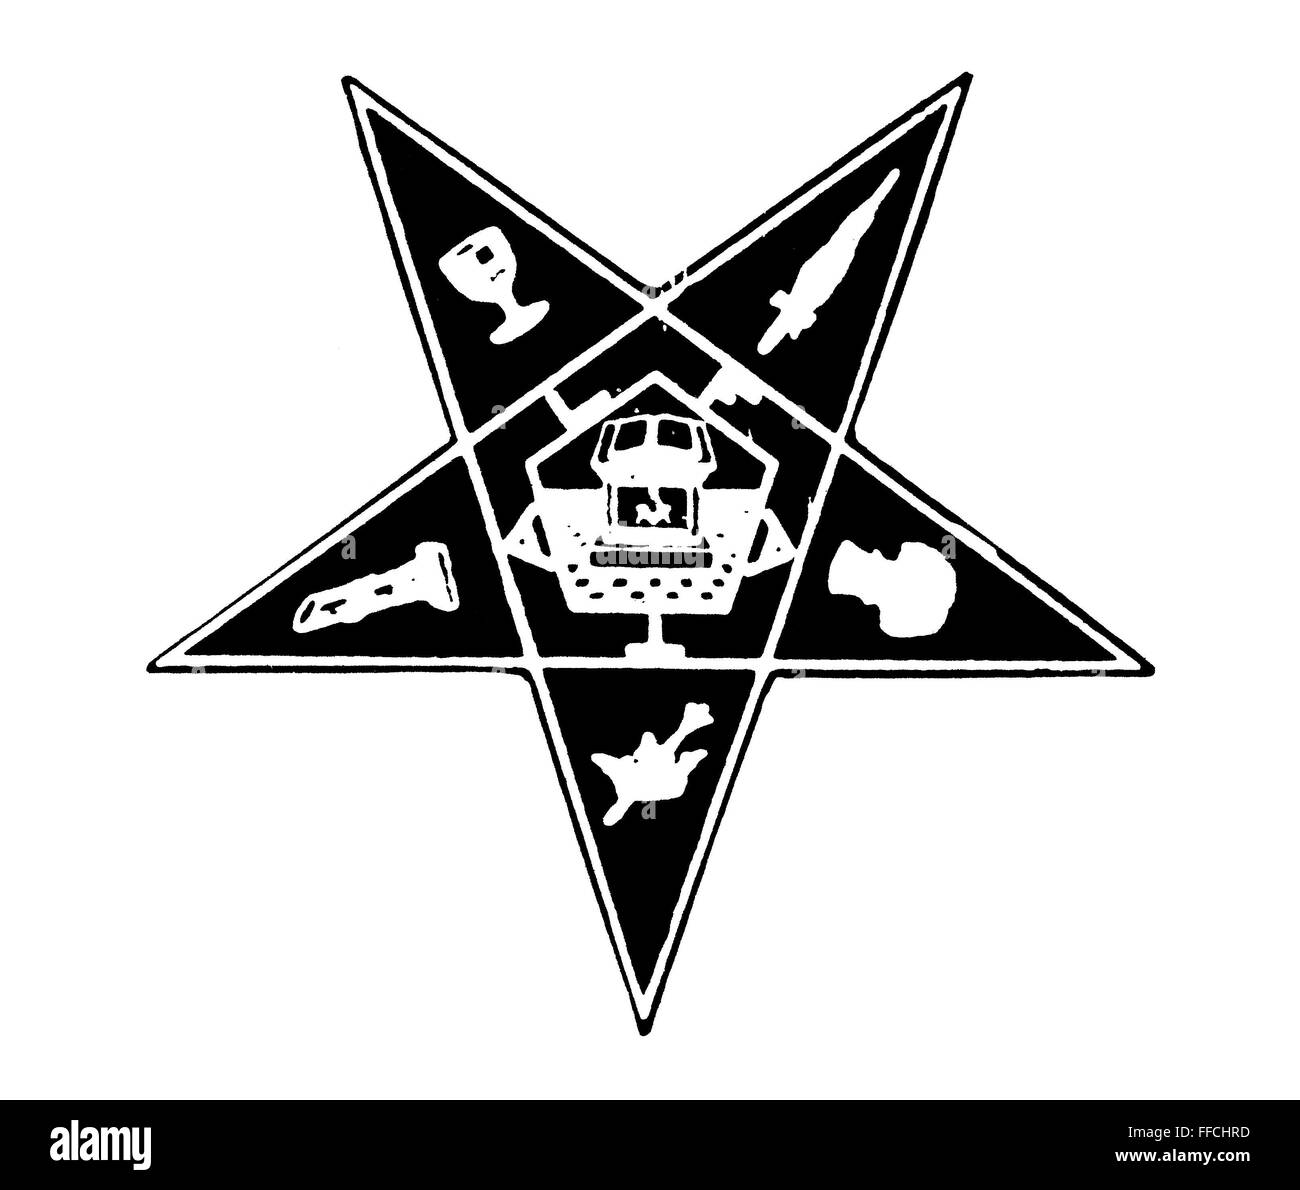 SEAL: FREEMASONRY. /nSeal of the Order of the Eastern Star, a body of Freemasonry. Stock Photo